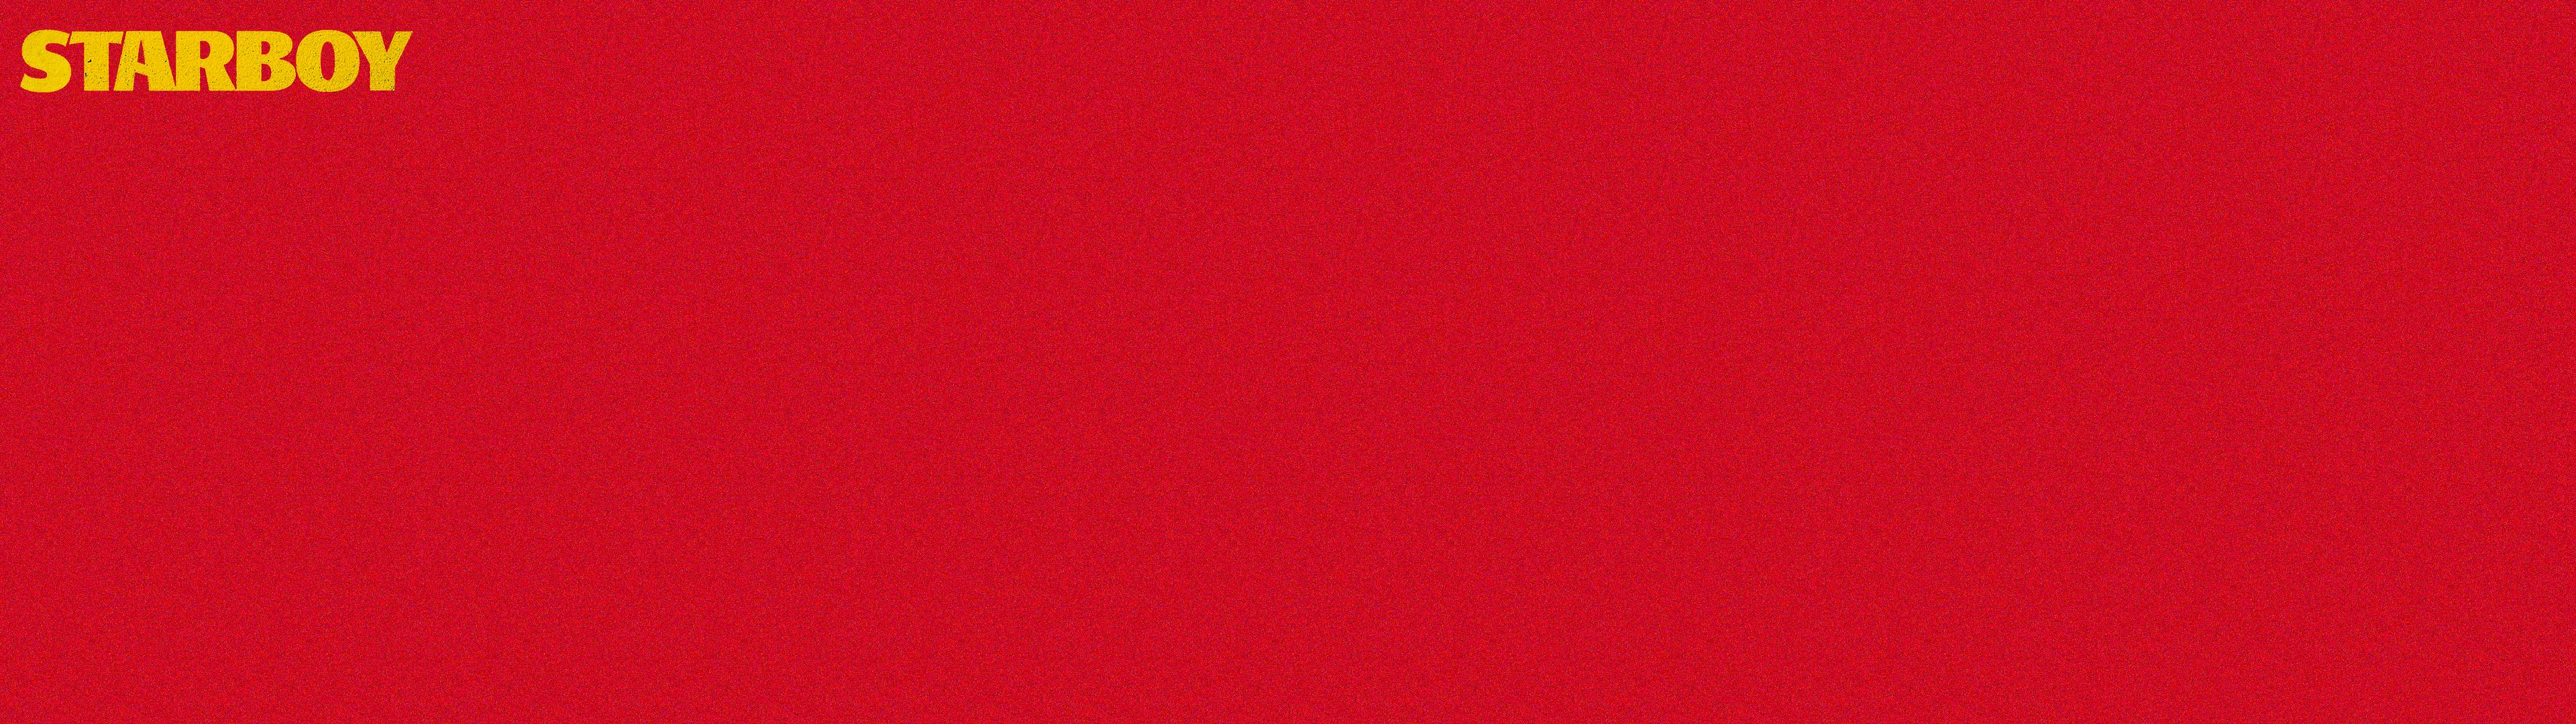 Simplistic Starboy Wallpaper 3840x1080 Carmine 309949 Hd Wallpaper Backgrounds Download Check out our weeknd starboy selection for the very best in unique or custom, handmade pieces from our wall decor shops. simplistic starboy wallpaper 3840x1080